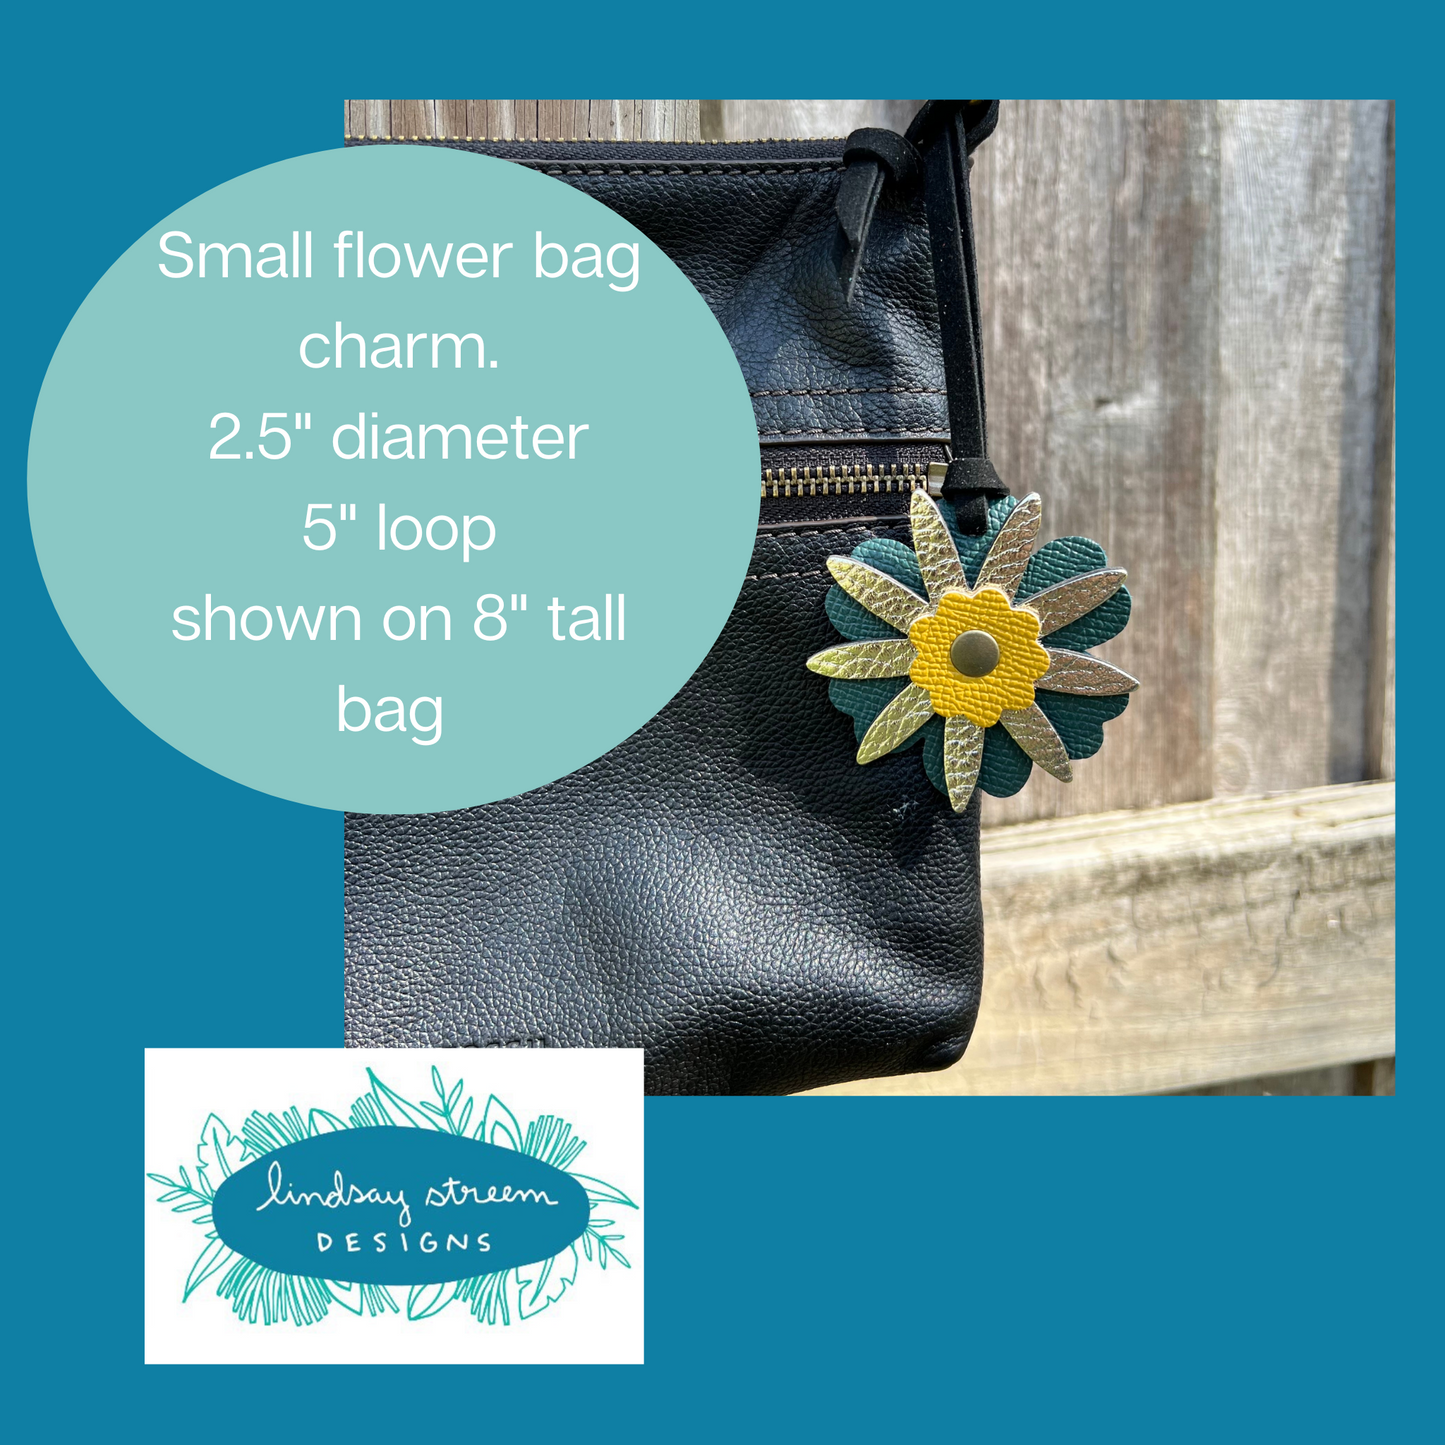 Small Leather Flower Purse Charm - Deep Teal, Yellow and Orange